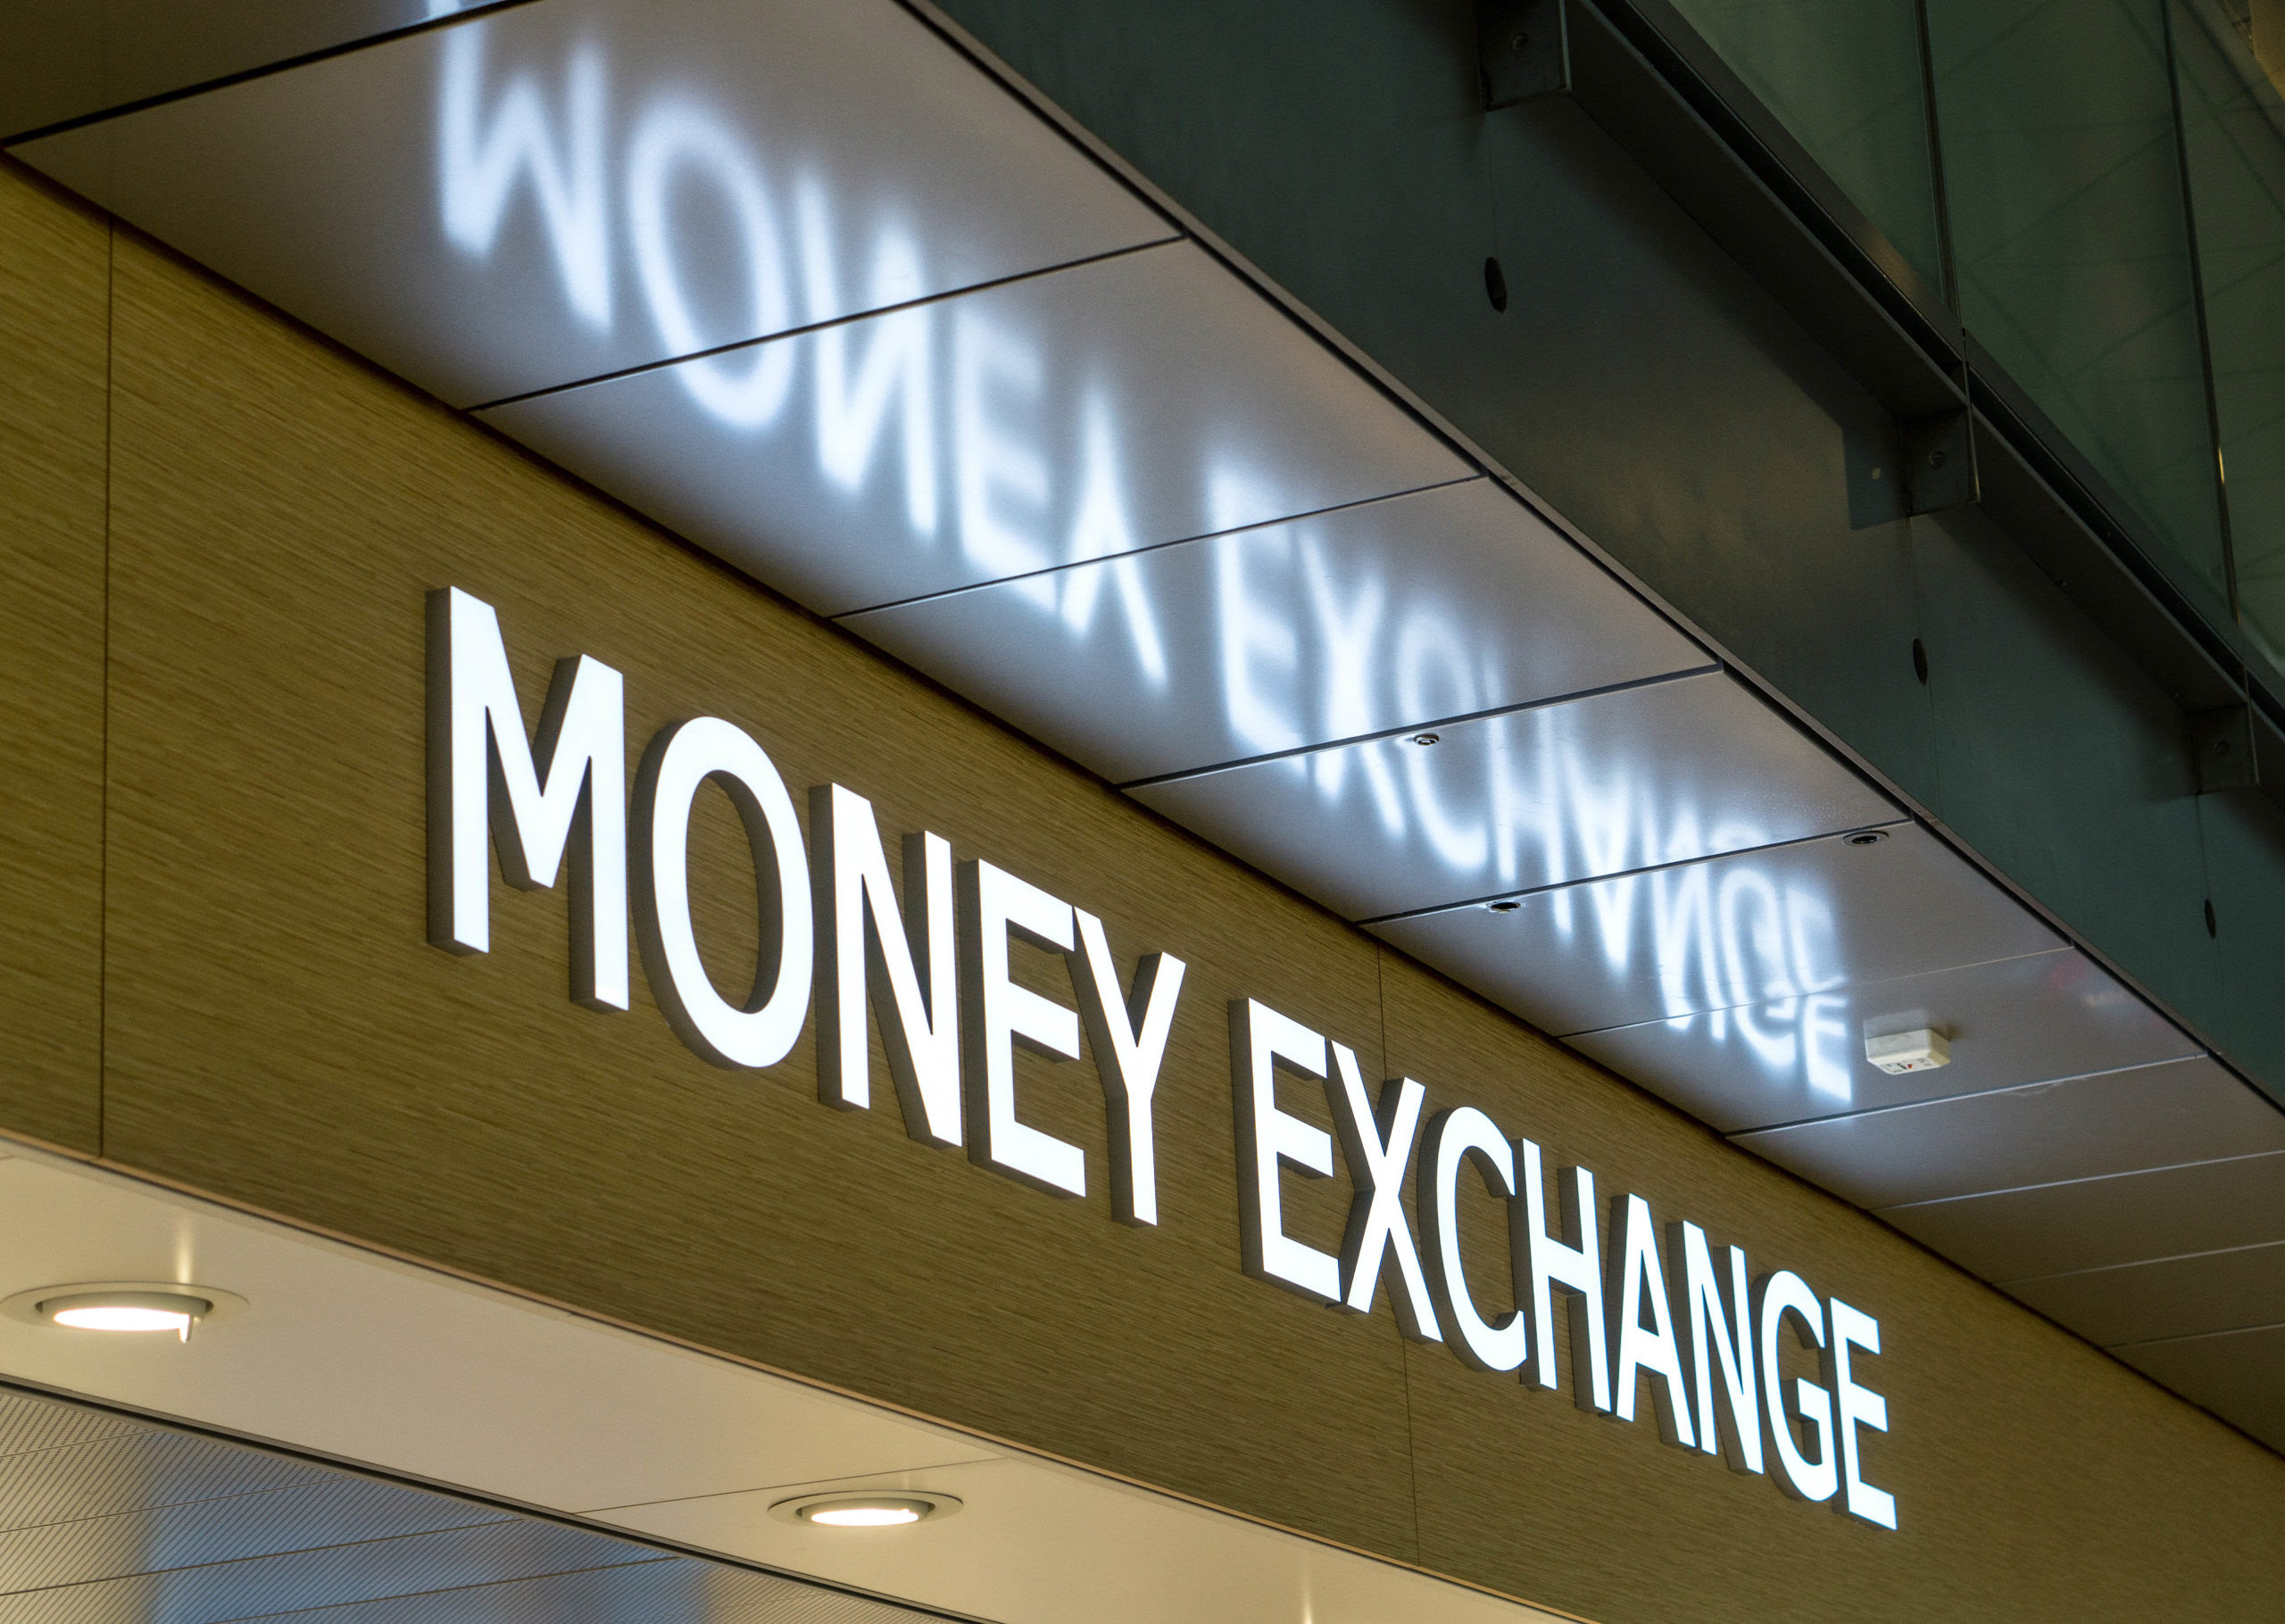 Phuket airport guide-Thailand-money exchange-inside services